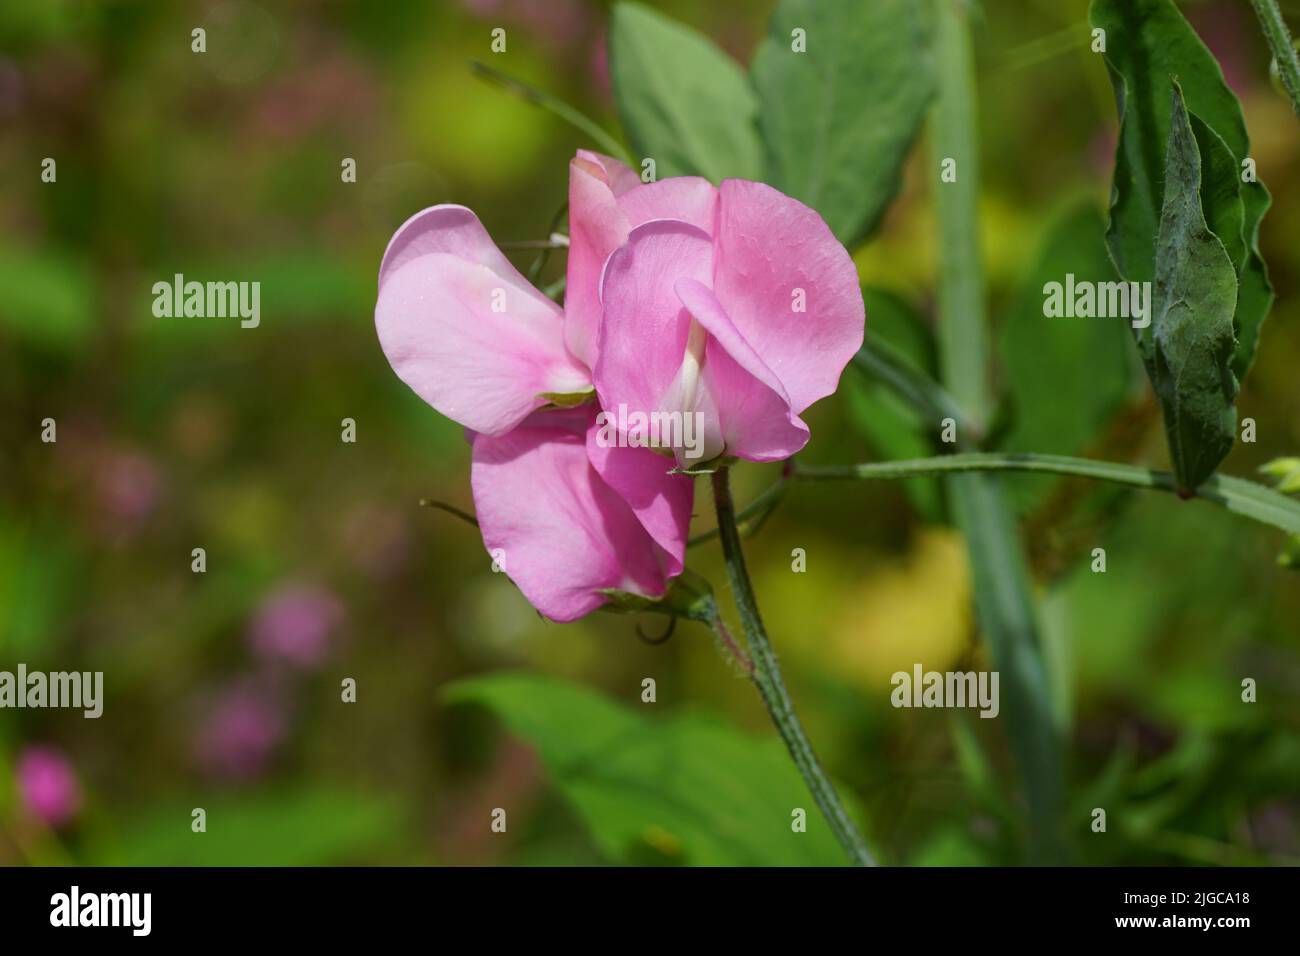 Close up pale pink flowers of everlasting pea (Lathyrus latifolius) of the pea family Fabaceae. Summer, July in a Dutch garden. Stock Photo